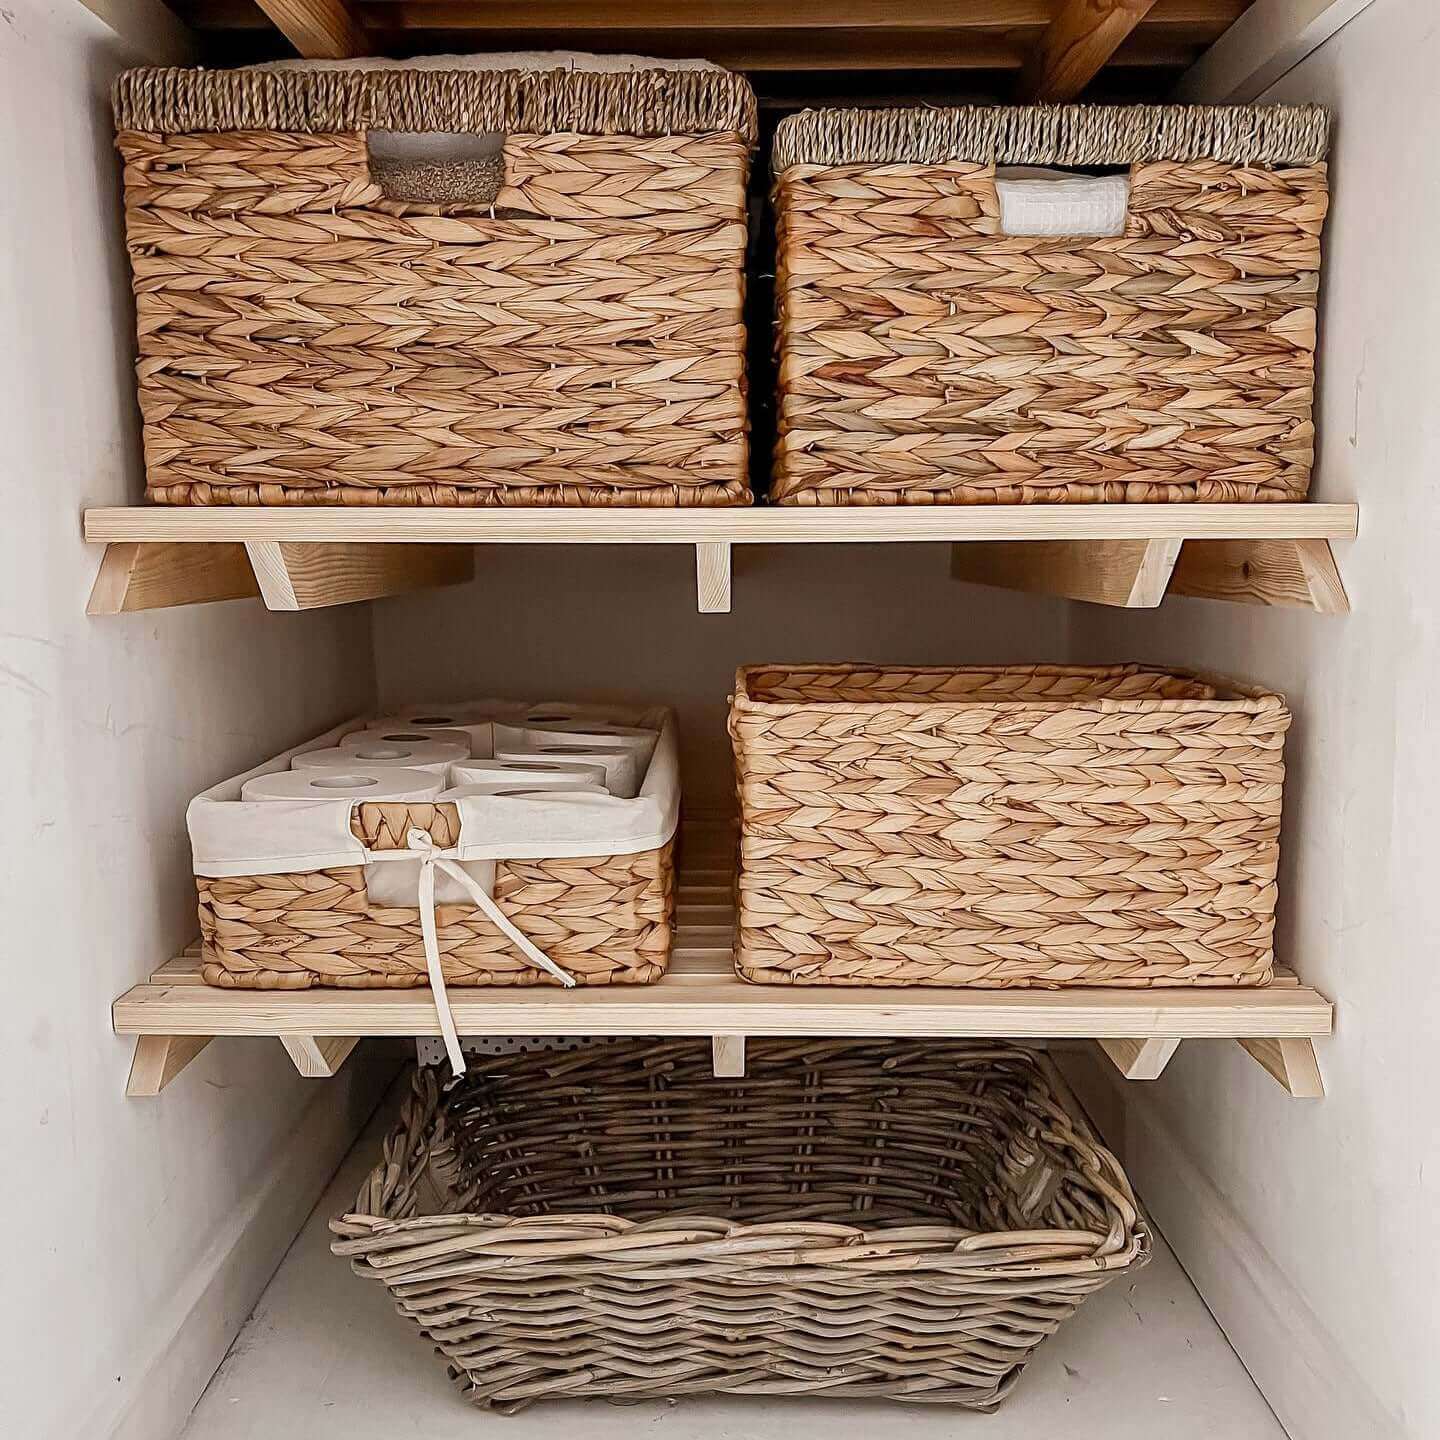 Airing Cupboard Wooden Slatted Shelves - 35 cm by 40 cm